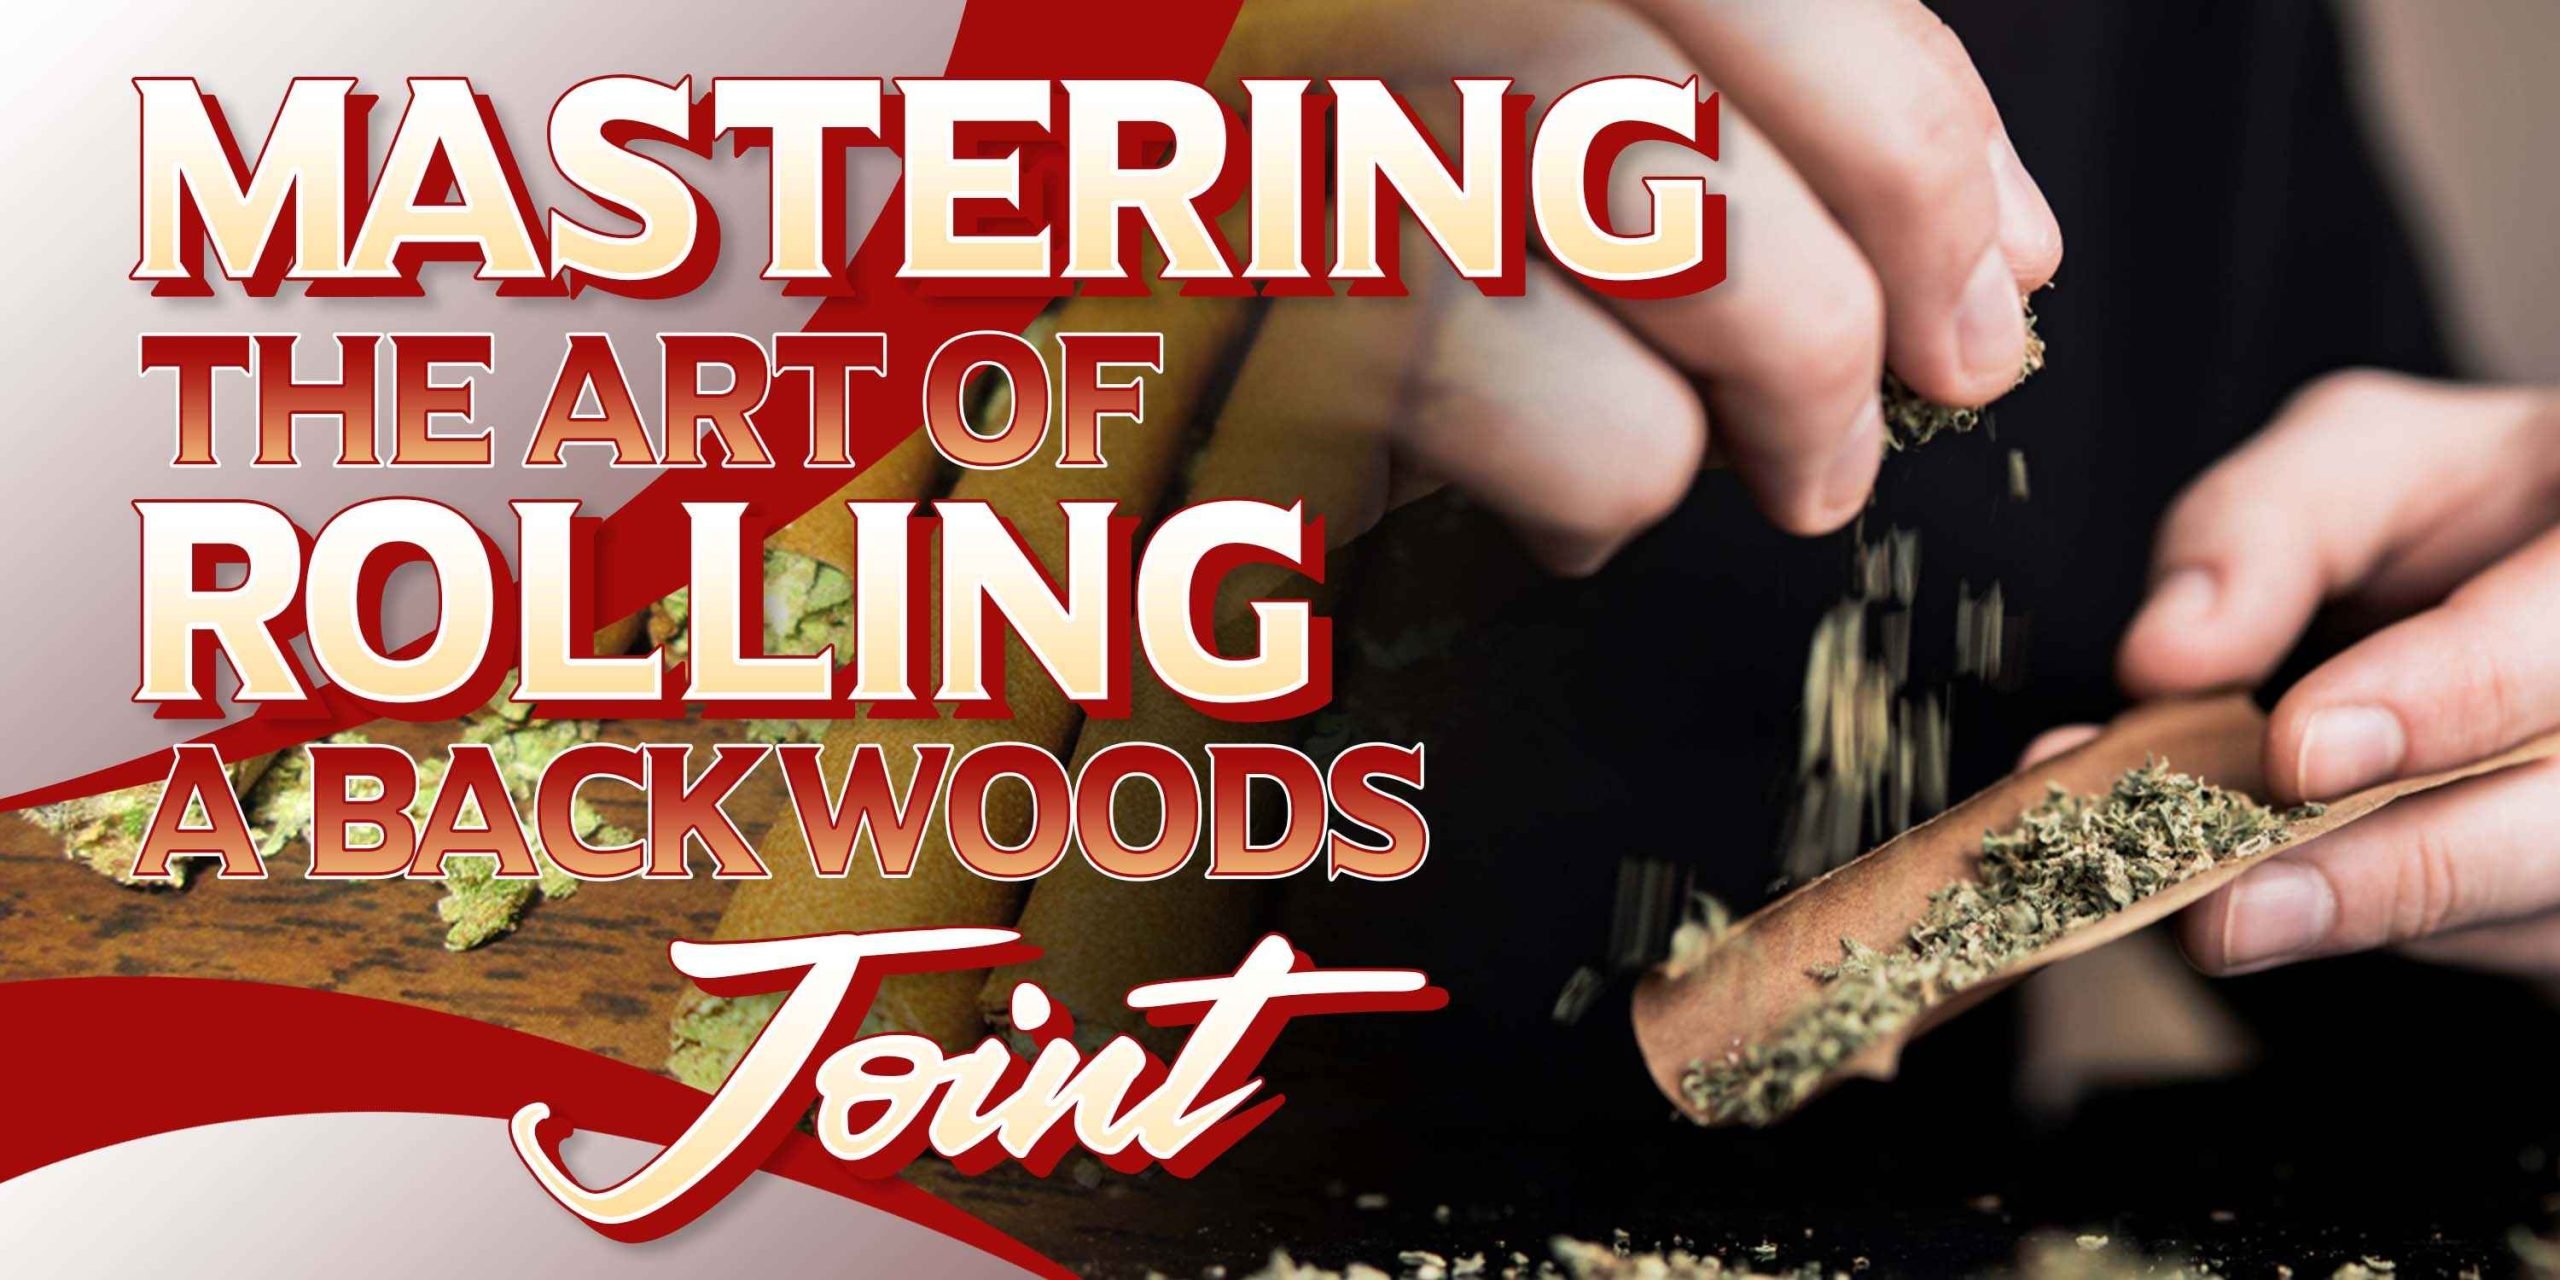 Freecompress Mastering The Art Of Rolling A Backwoods Joint Scaled, Crop King Seeds